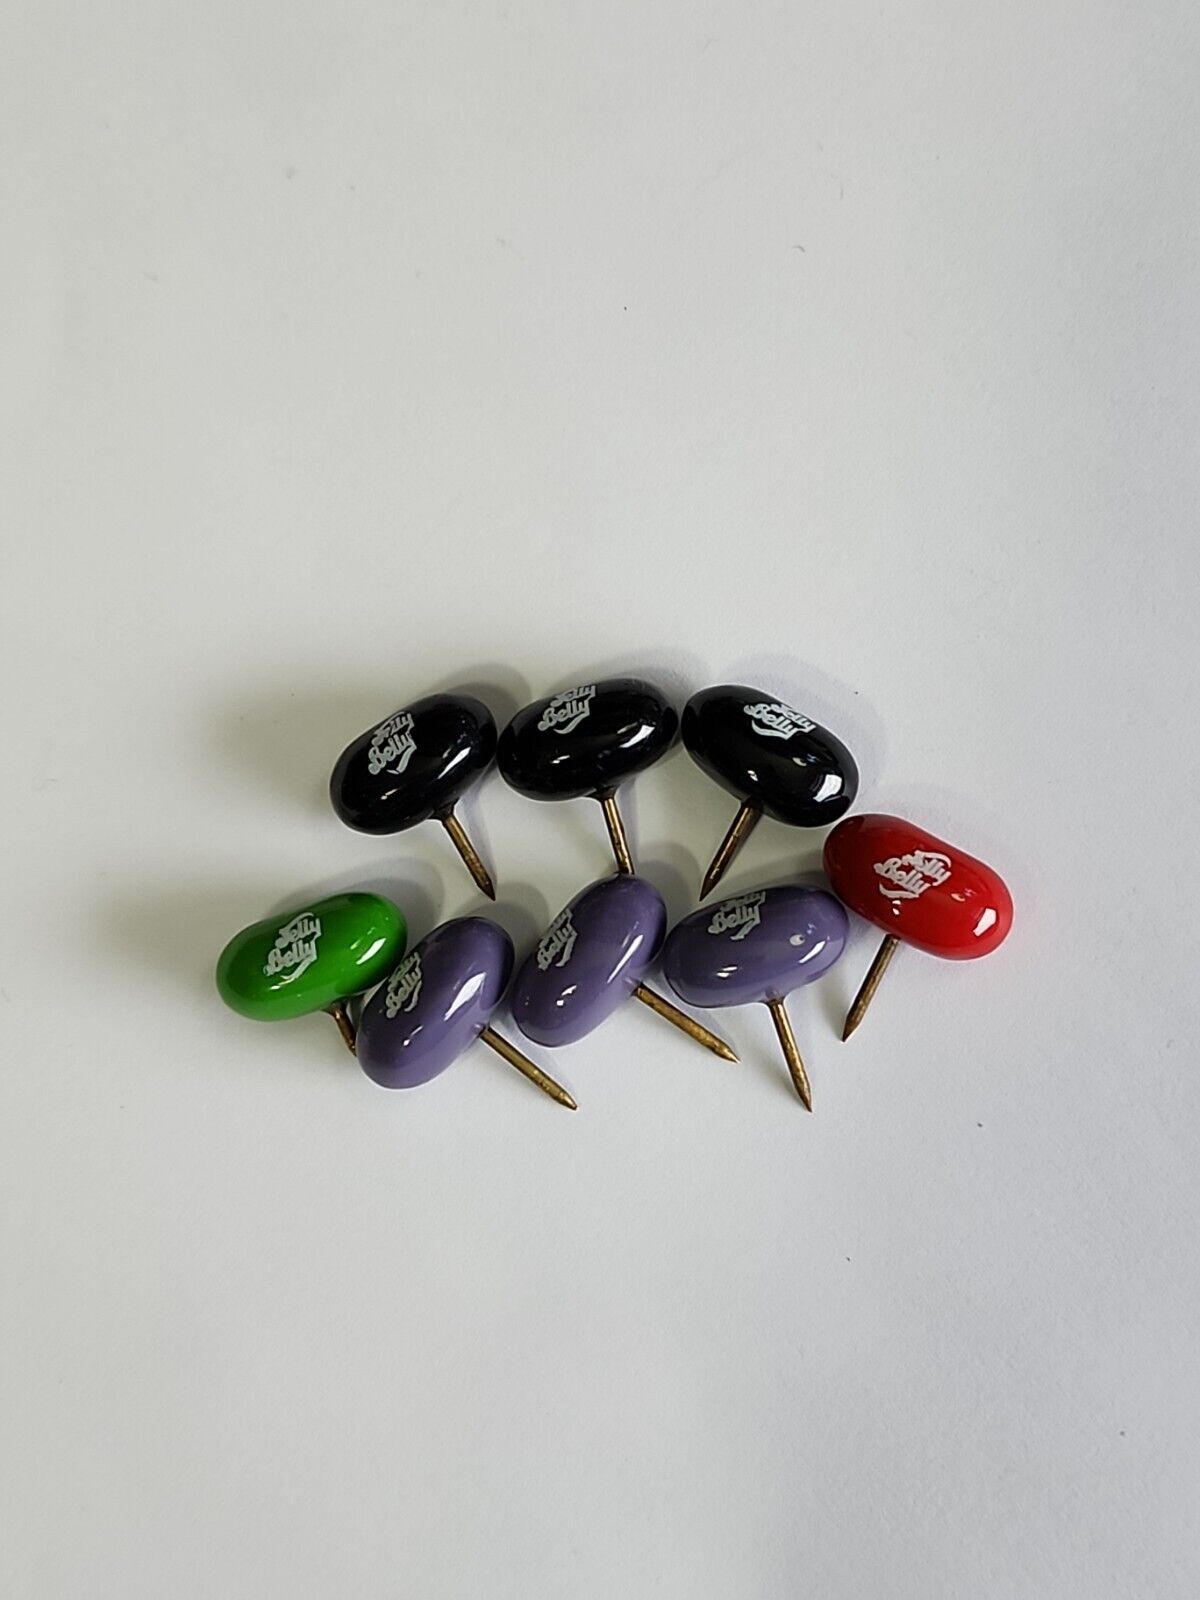 Jelly Belly Jelly Bean Lapel Hat Jacket Pin Lot Of 8